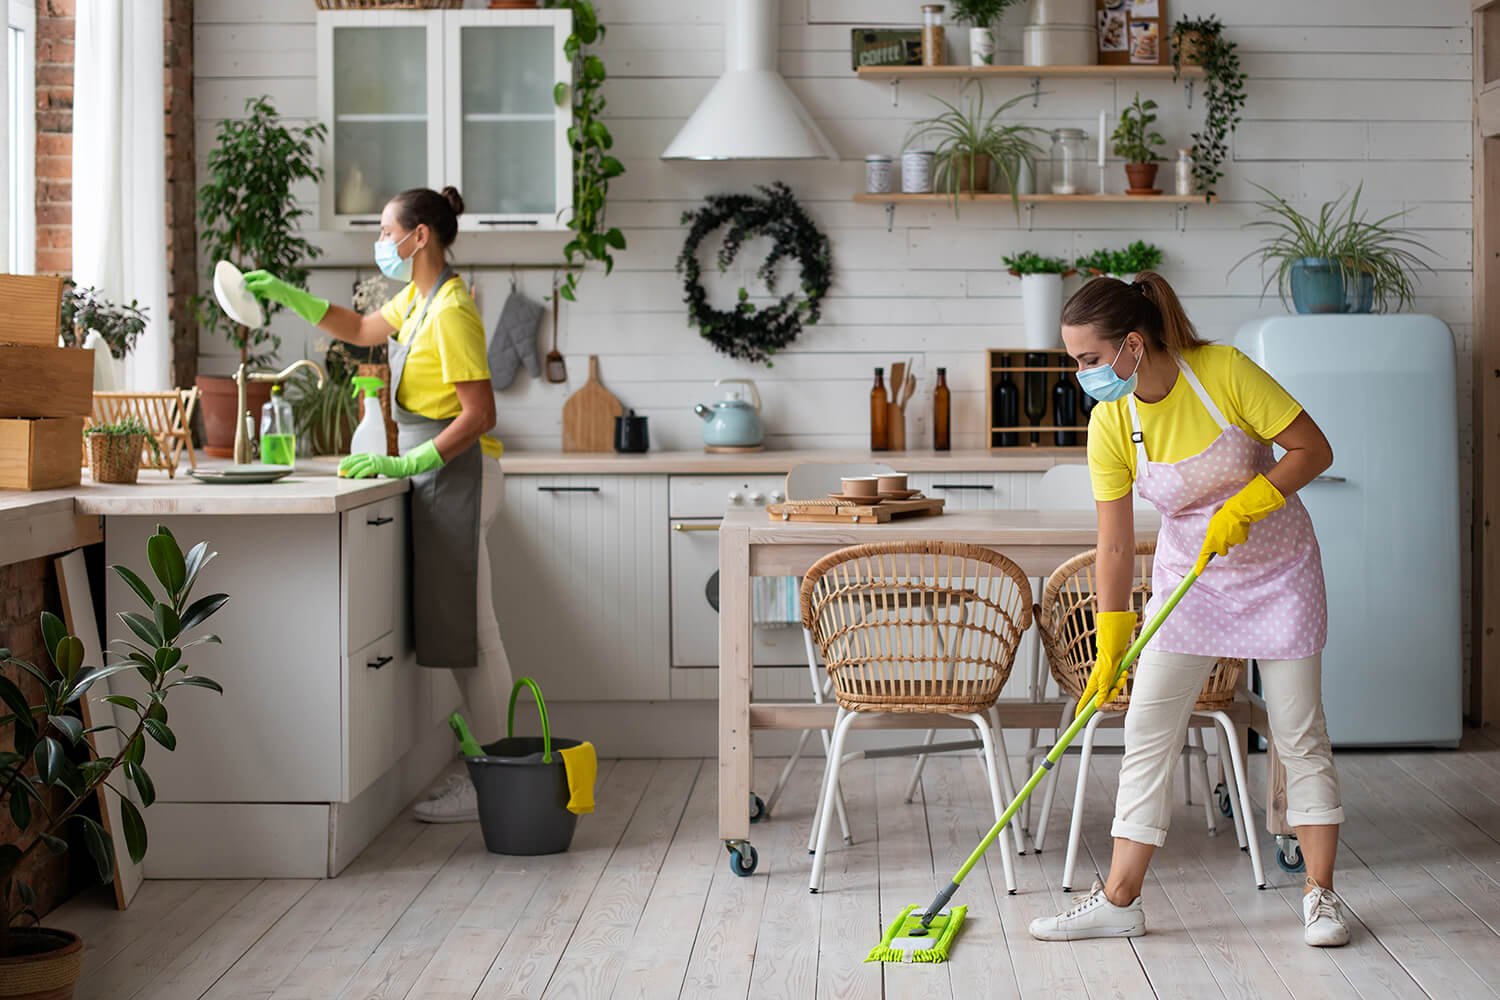 general-cleaning-of-the-kitchen-professional-house-ZJG2FTF.jpg